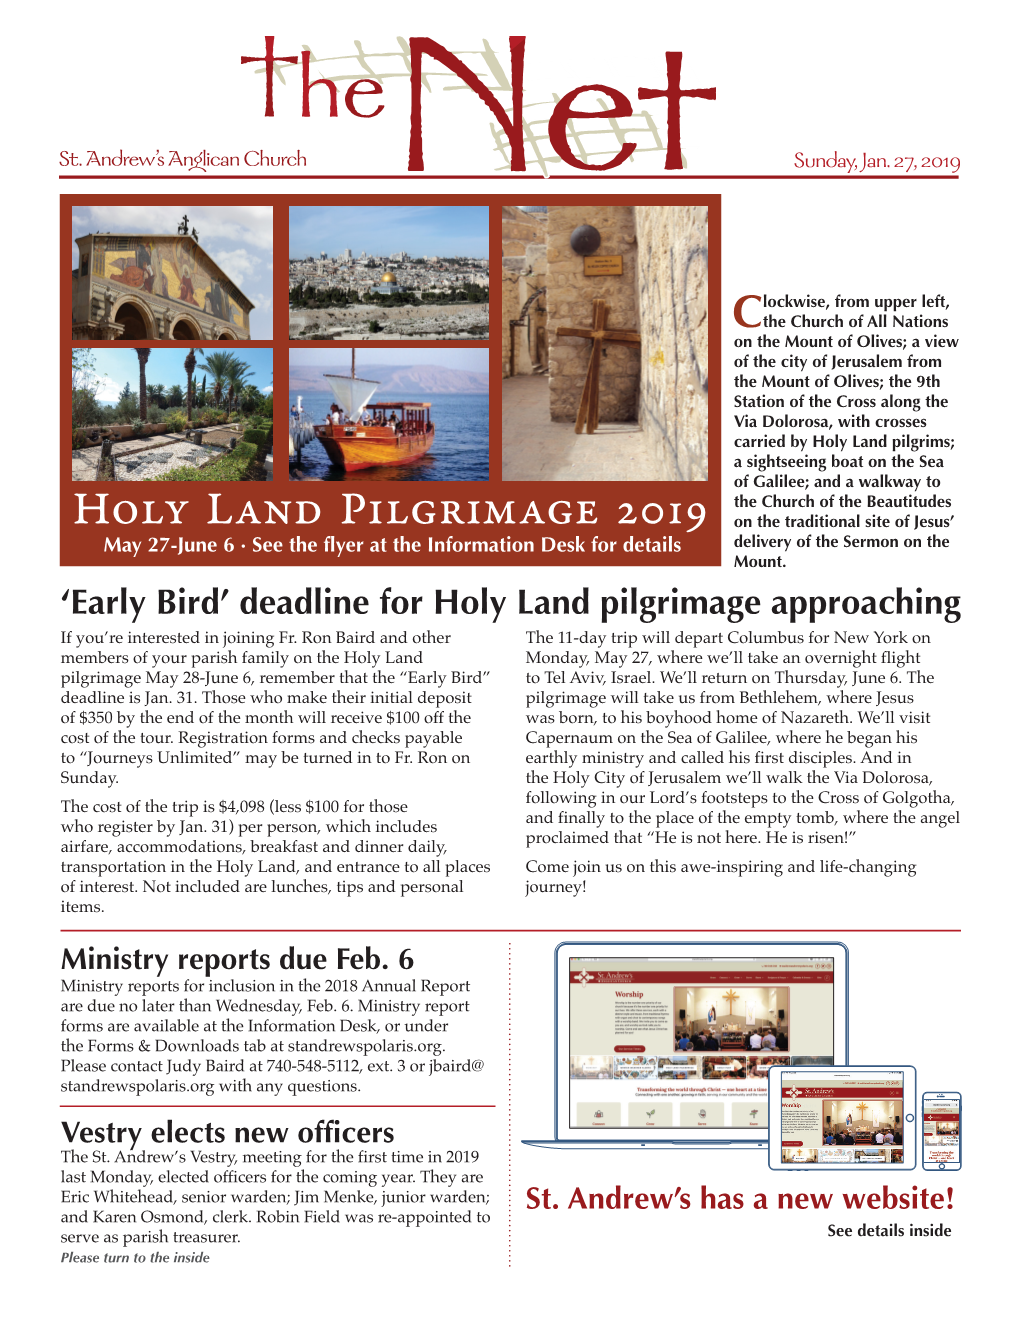 Early Bird’ Deadline for Holy Land Pilgrimage Approaching If You’Re Interested in Joining Fr